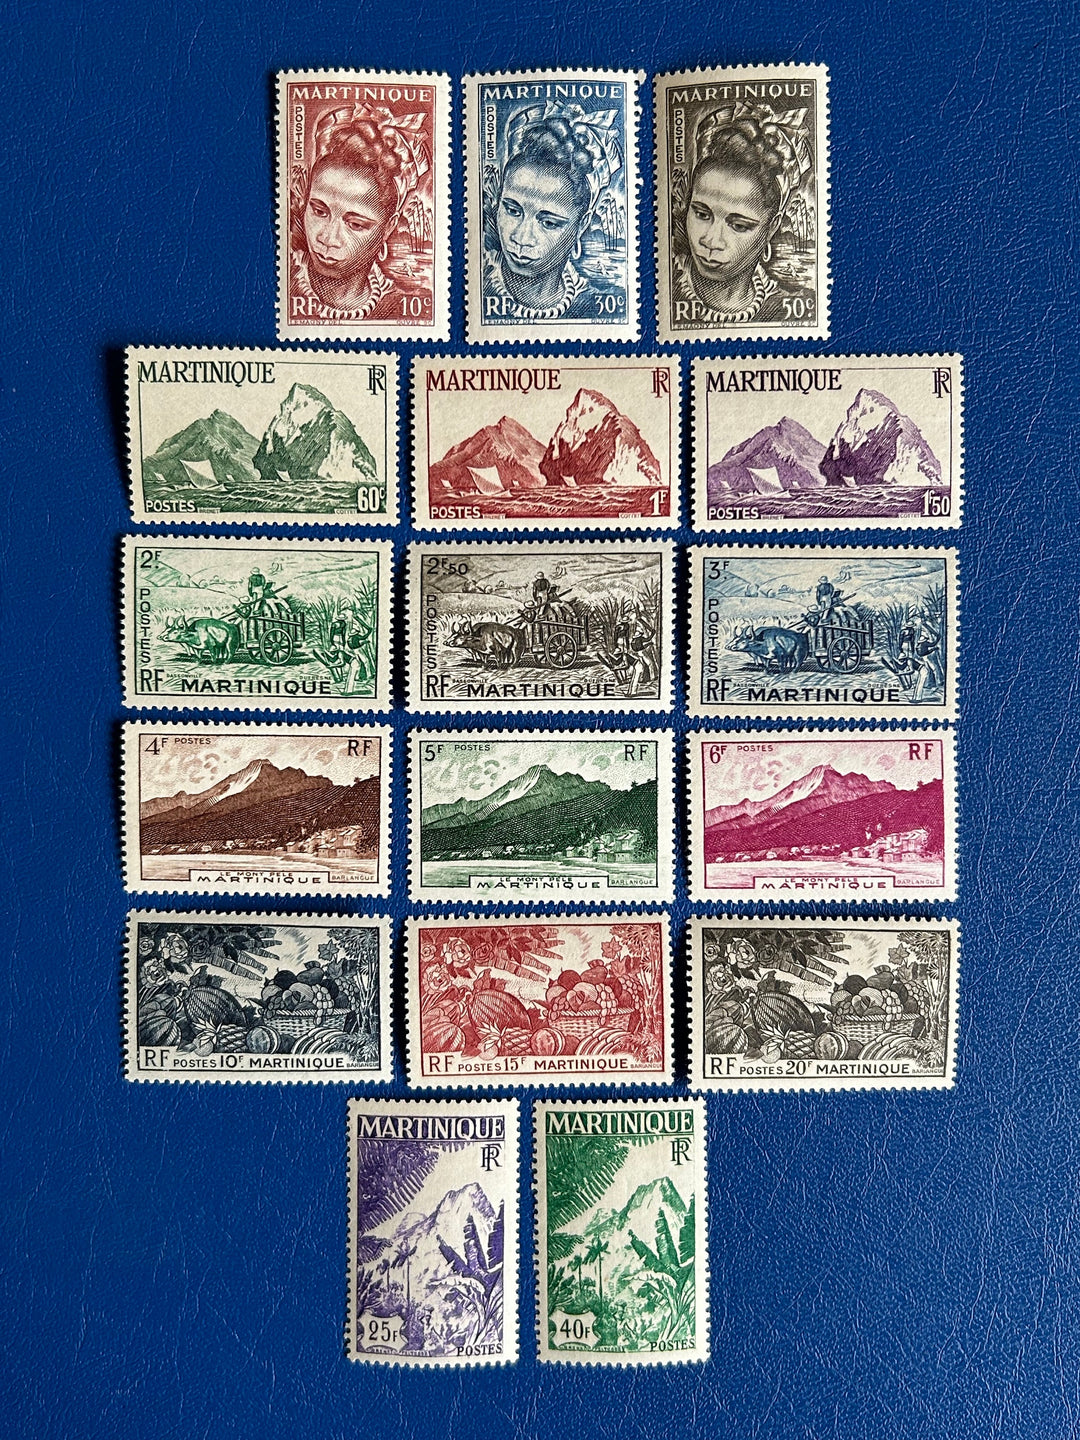 Martinique - Original Vintage Postage Stamps- 1947 - Definitives: Local Motifs - for the collector, artist or crafter